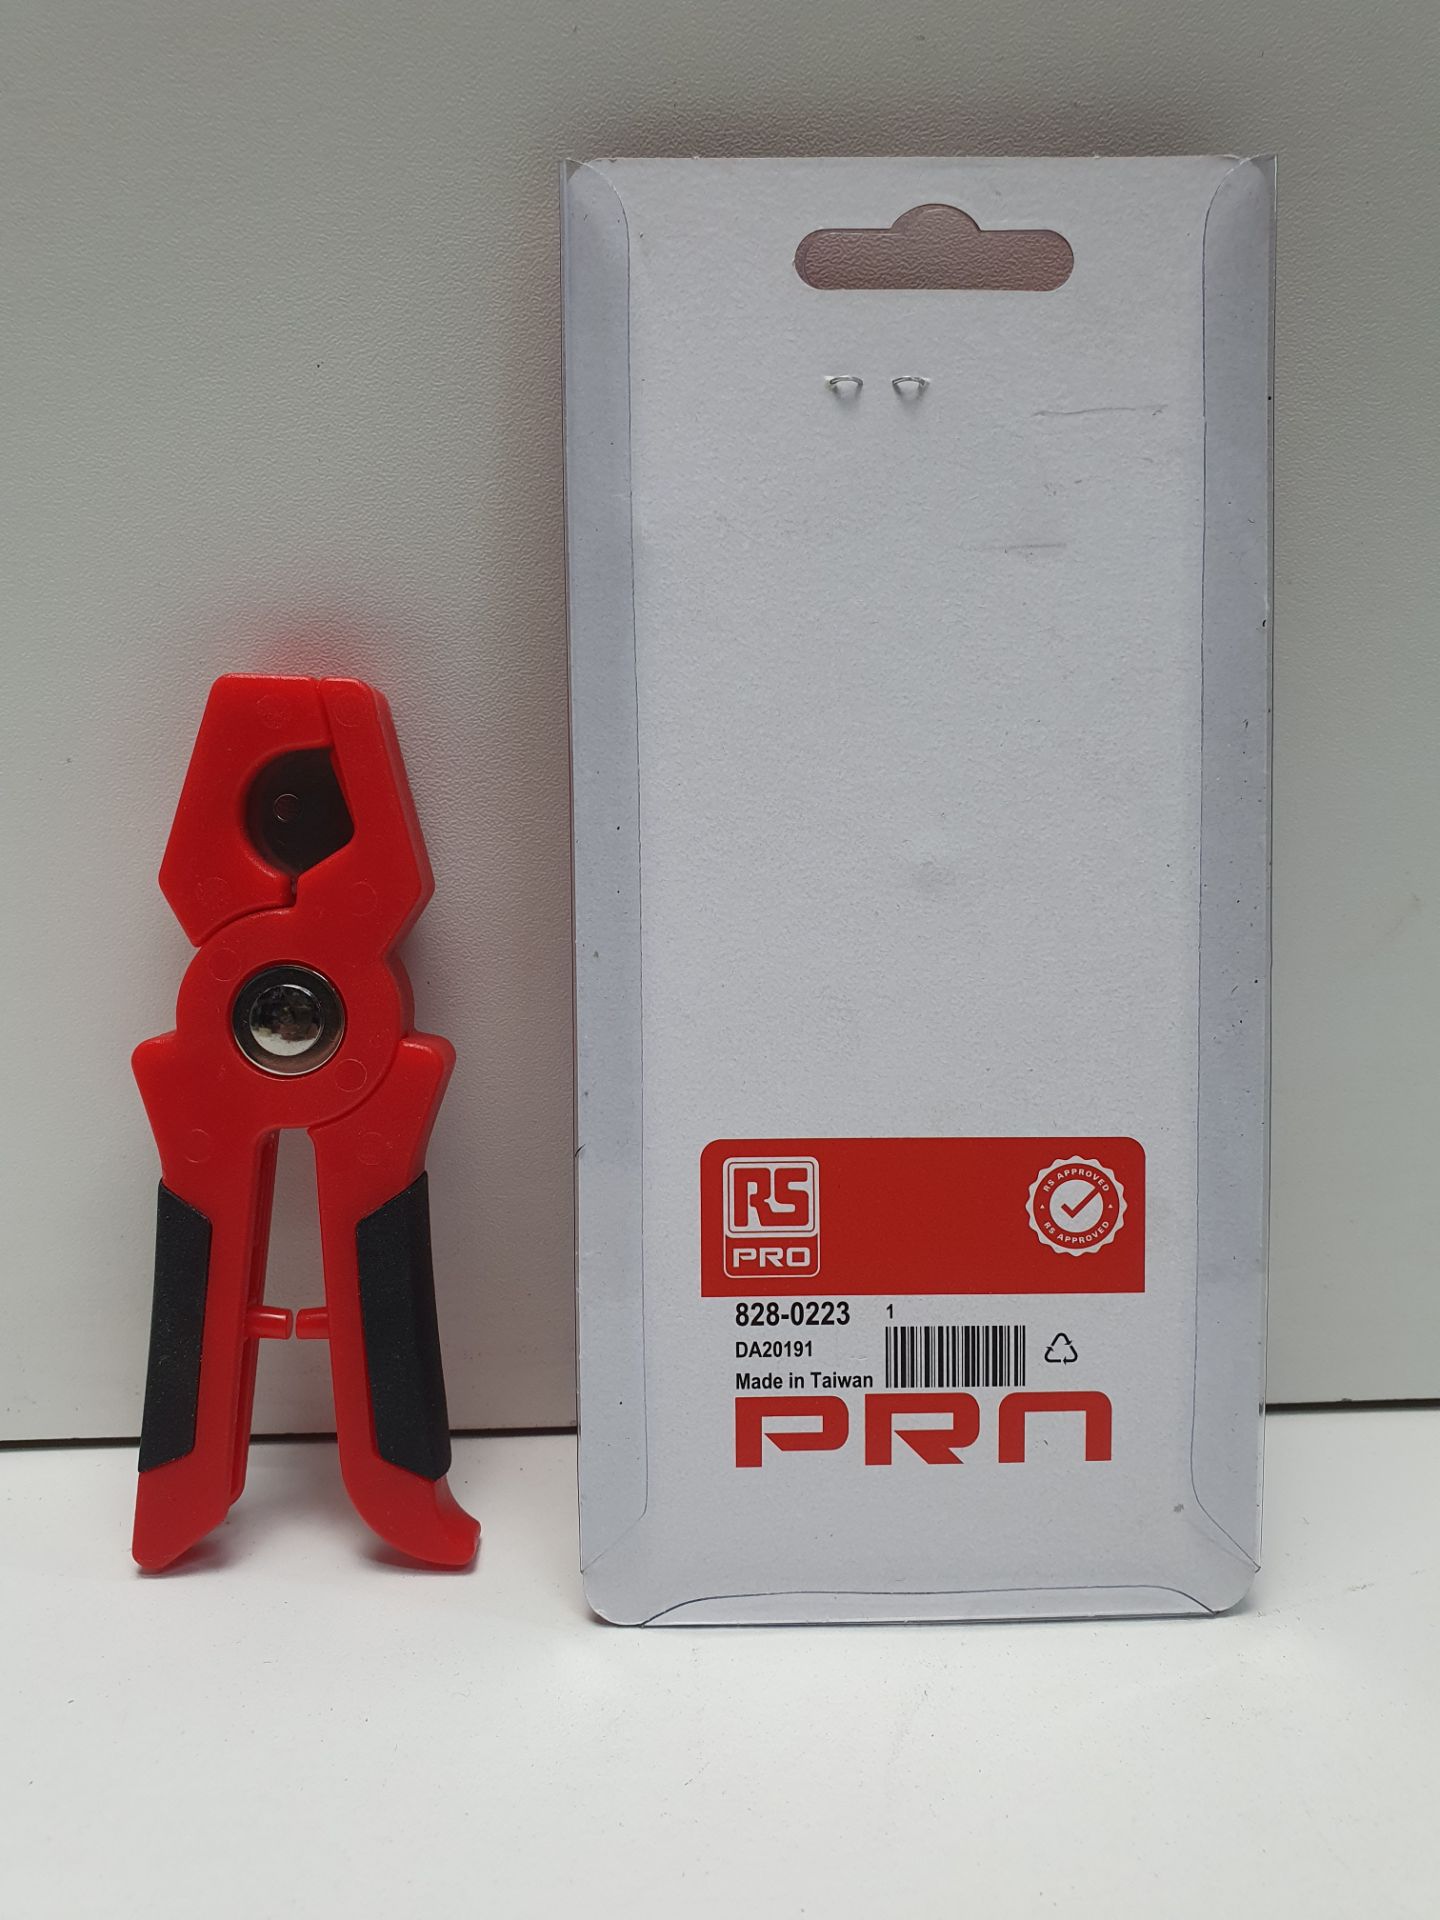 4 Sets of RS PRO Pipe Cutter's 13 mm, Cuts Plastic - Image 2 of 2